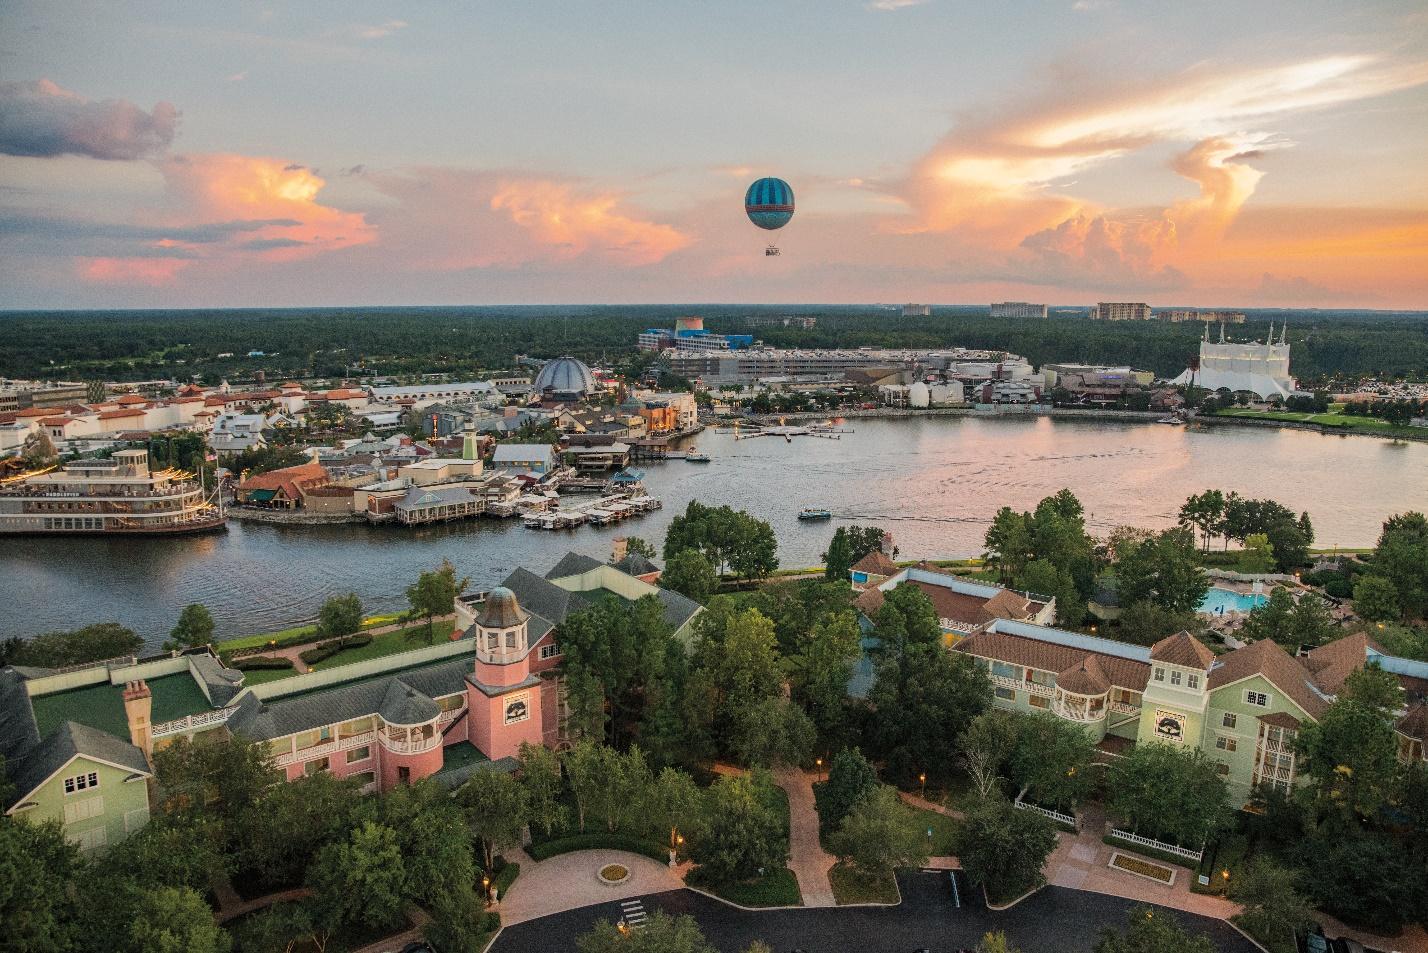 Beautiful sunset with hot air balloon in distance and view of river and colorful buildings. 